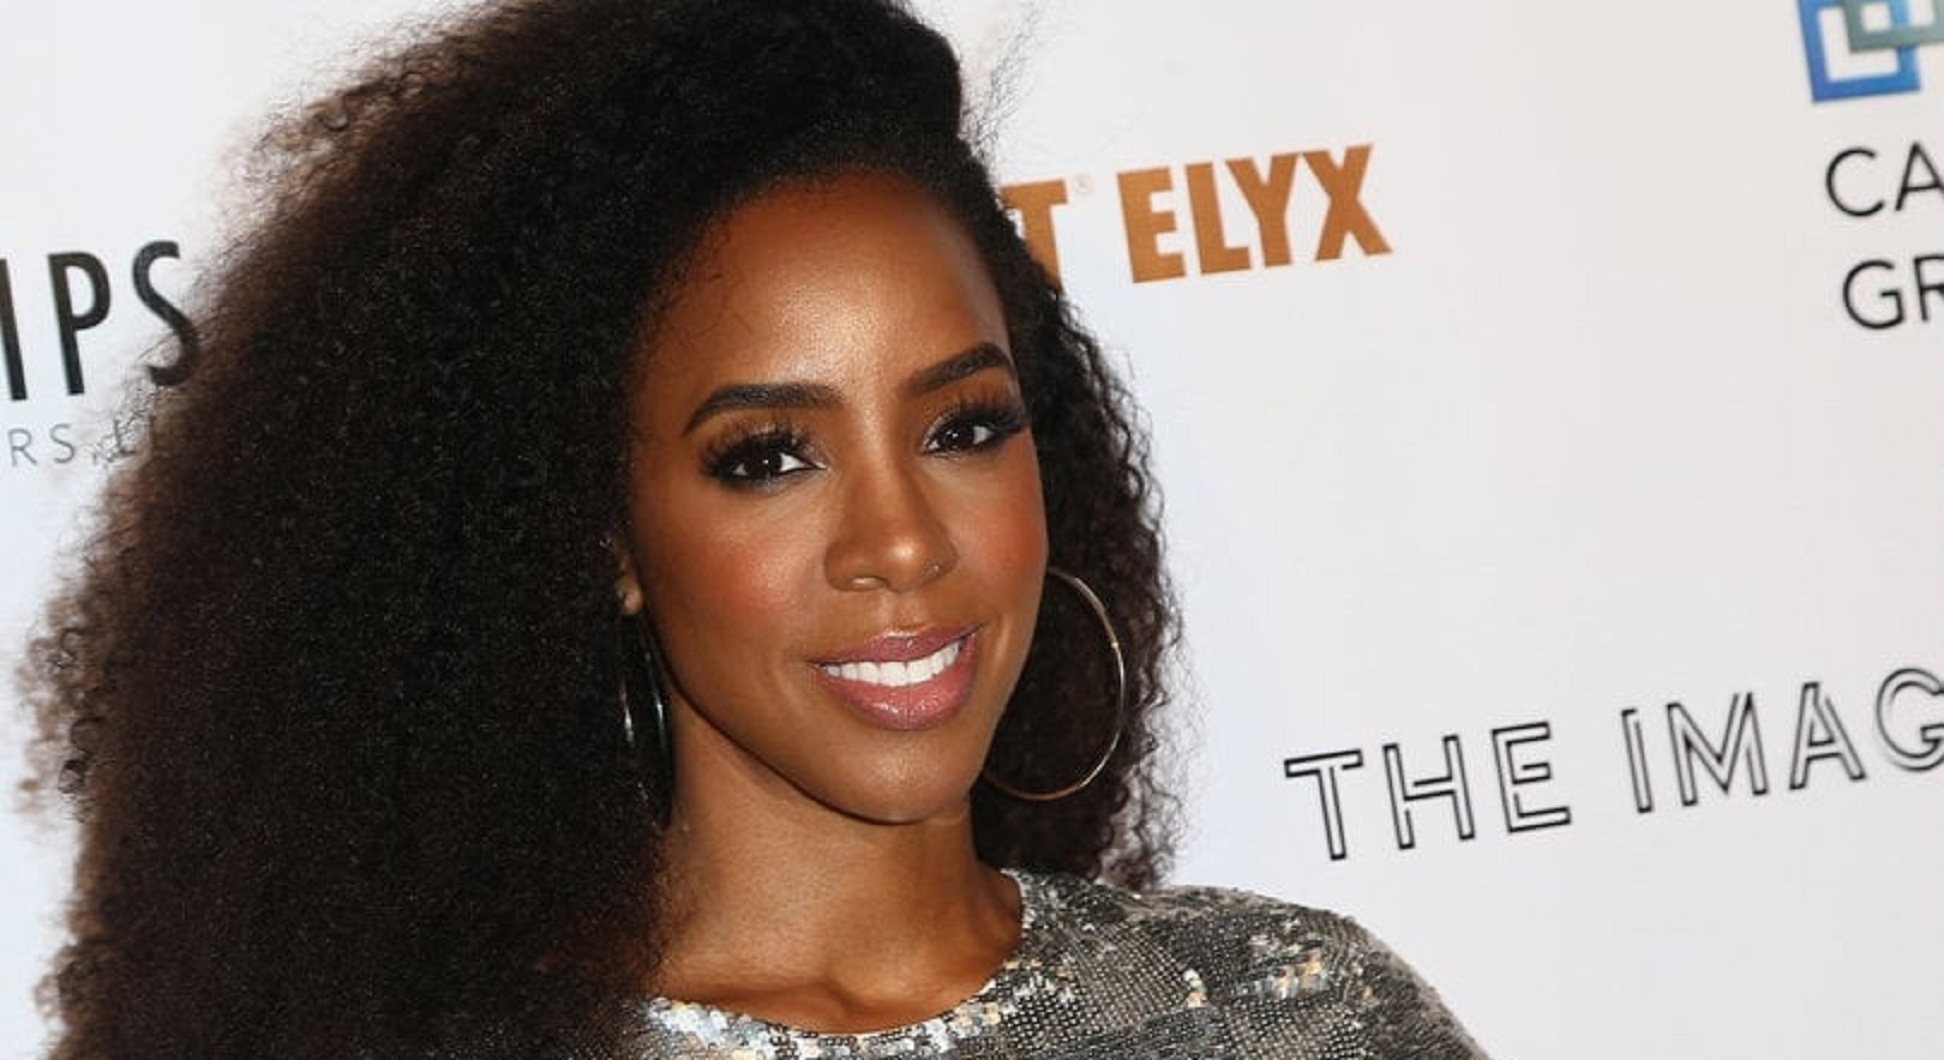 Three Brand New Songs Released By Kelly Rowland: Listen To Them Here!